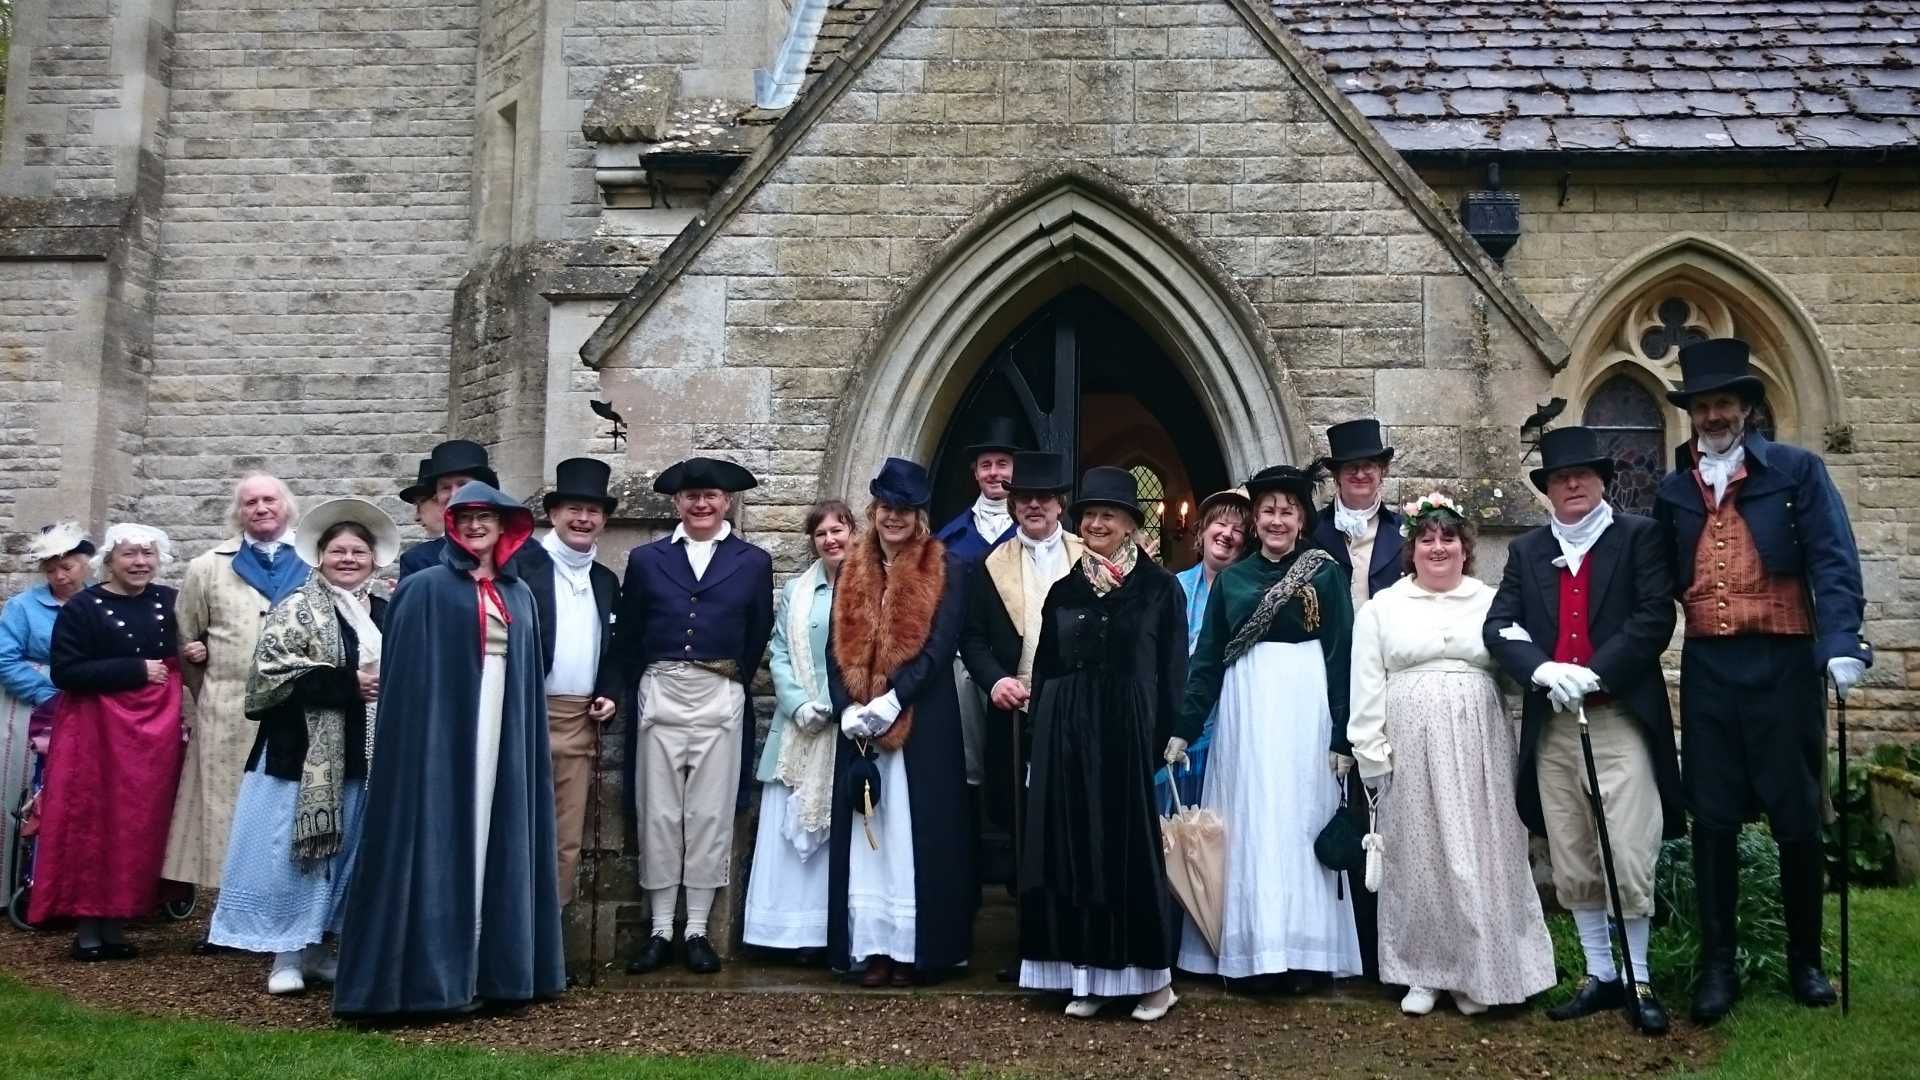 Lincolnshire Regency Society members pictured in period costume outside Gunby Church